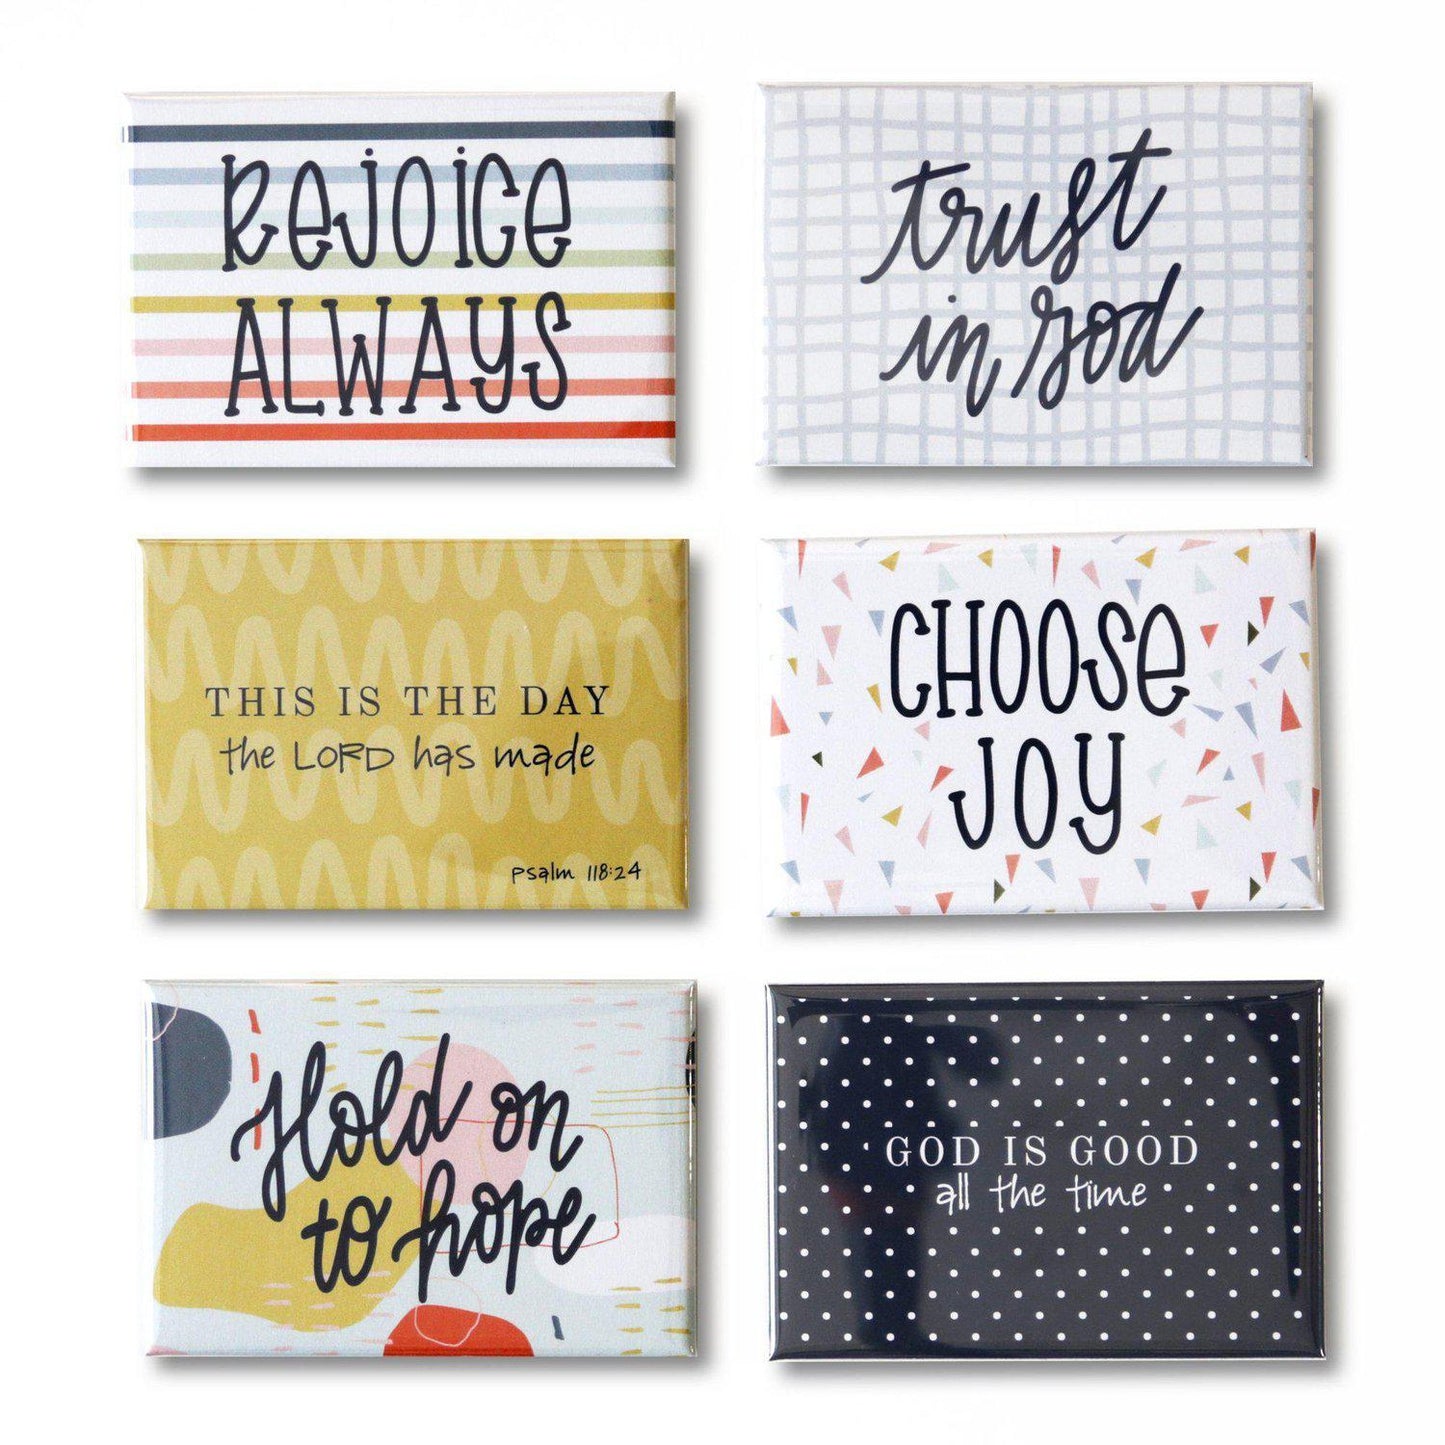 Meaningful Magnet Set from Muscadine Press. A simple reminder to choose joy, remember truth, and trust God.